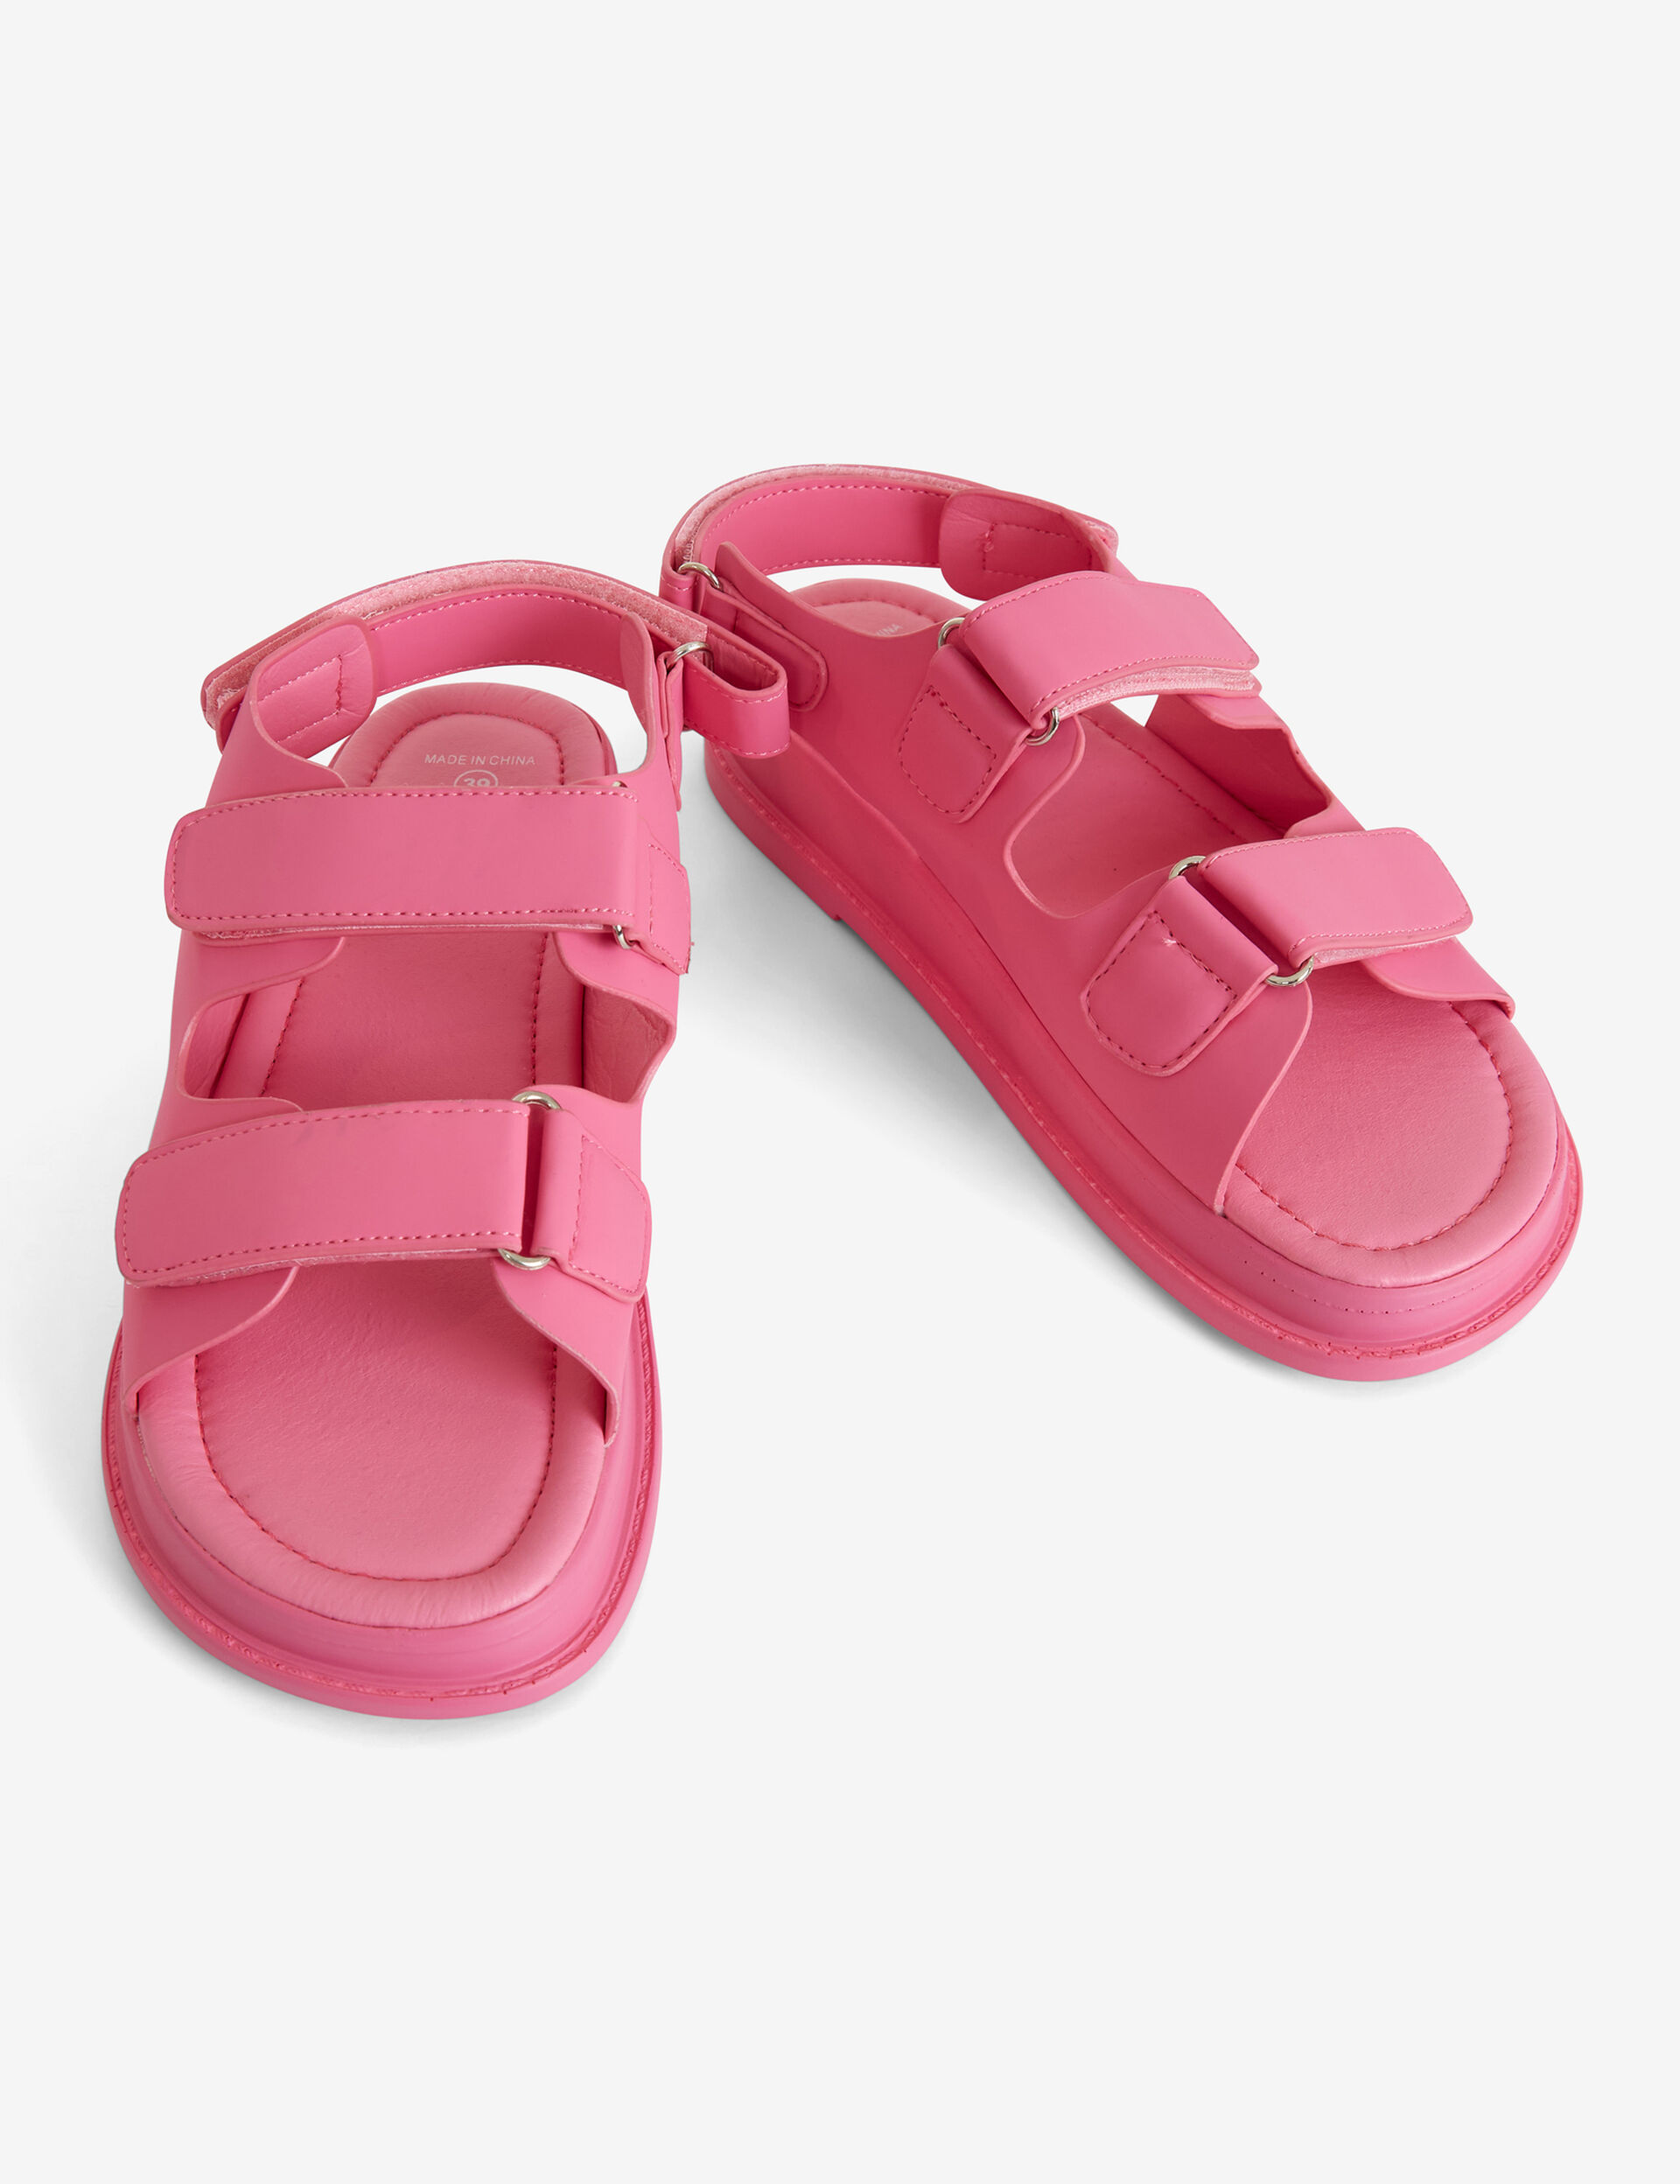 Imitation-leather sandals with Velcro